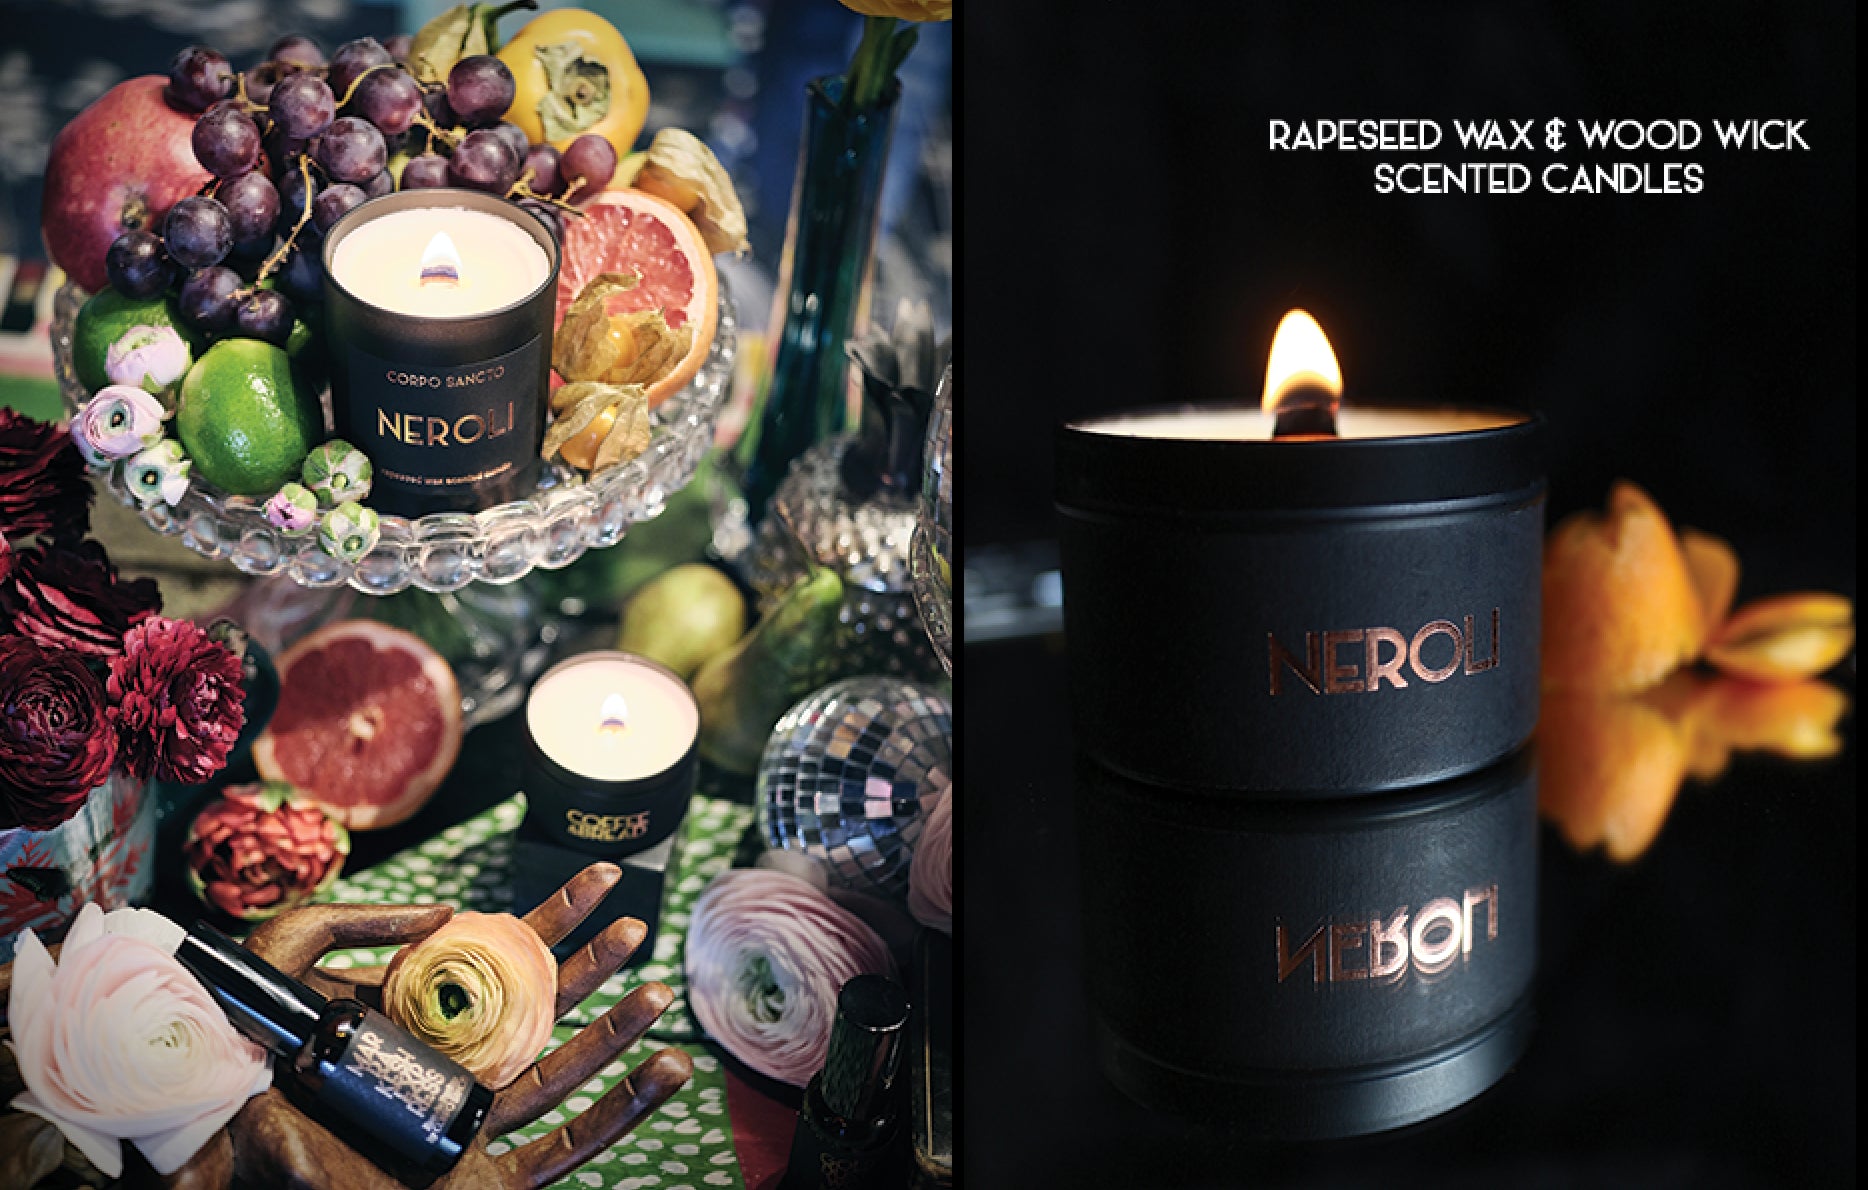 Rapeseed Wax & Wood Wick Scented Candles